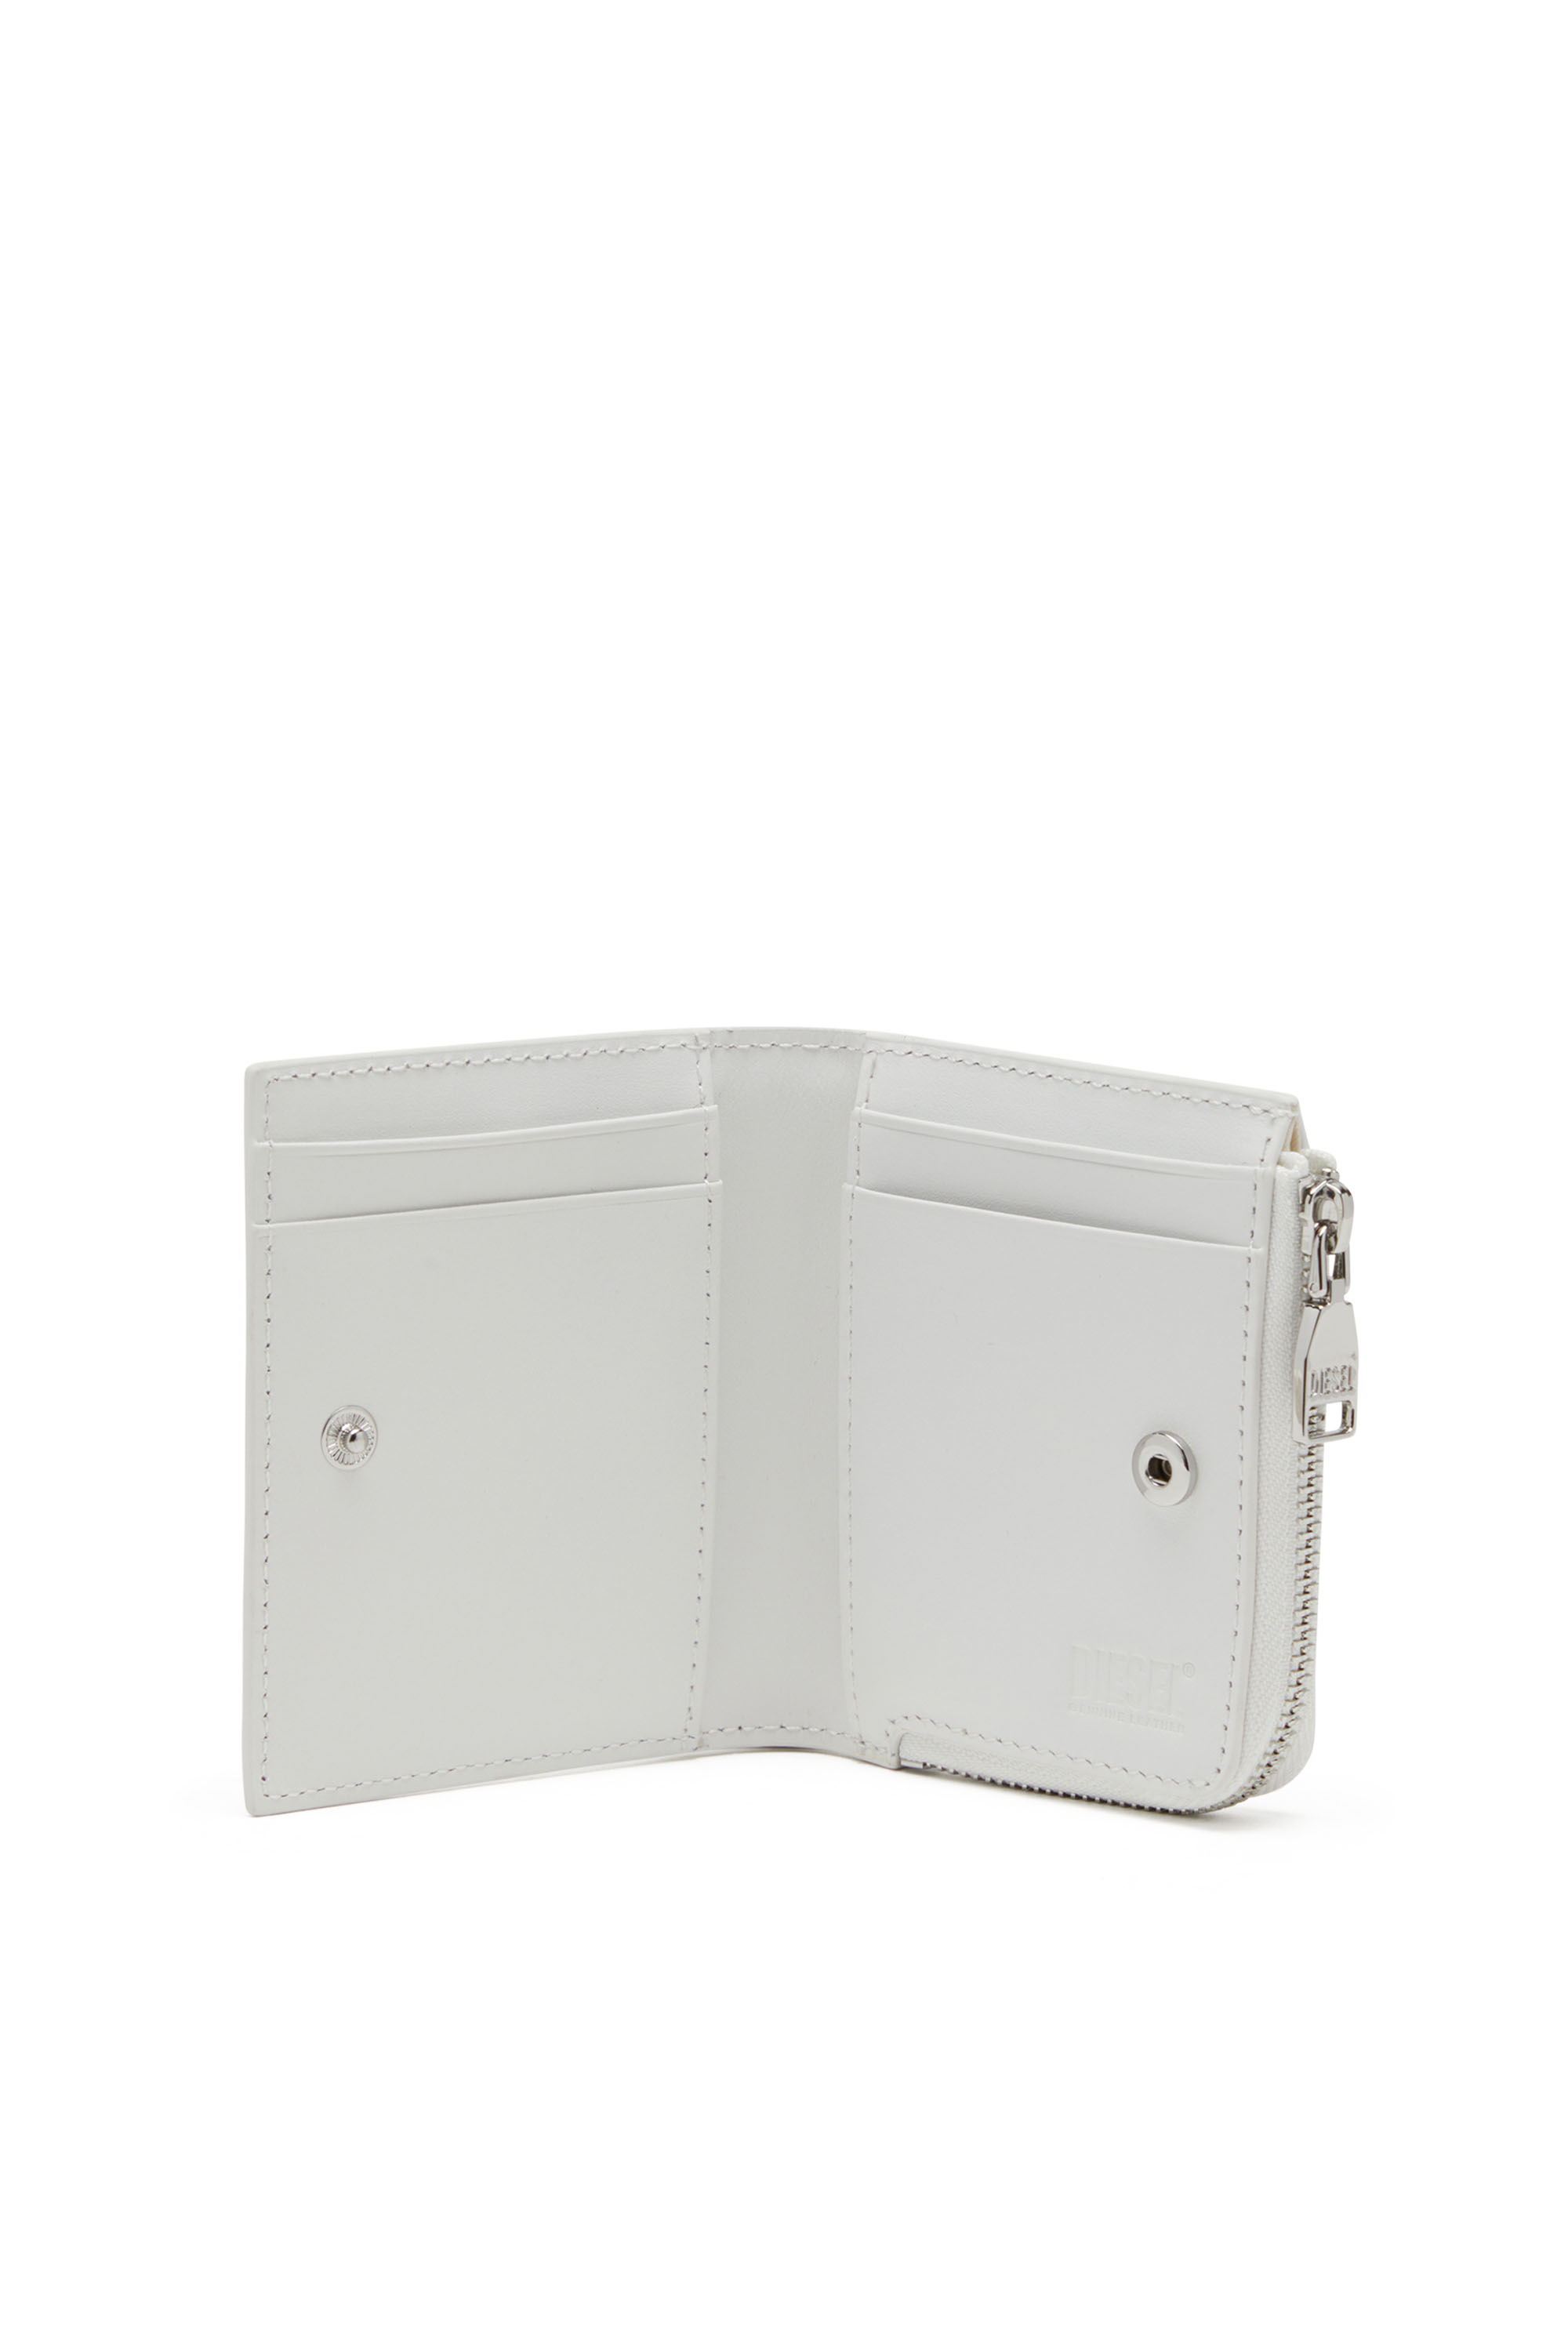 Diesel - 1DR CARD HOLDER ZIP L, Woman Bi-fold card holder in nappa leather in White - Image 3